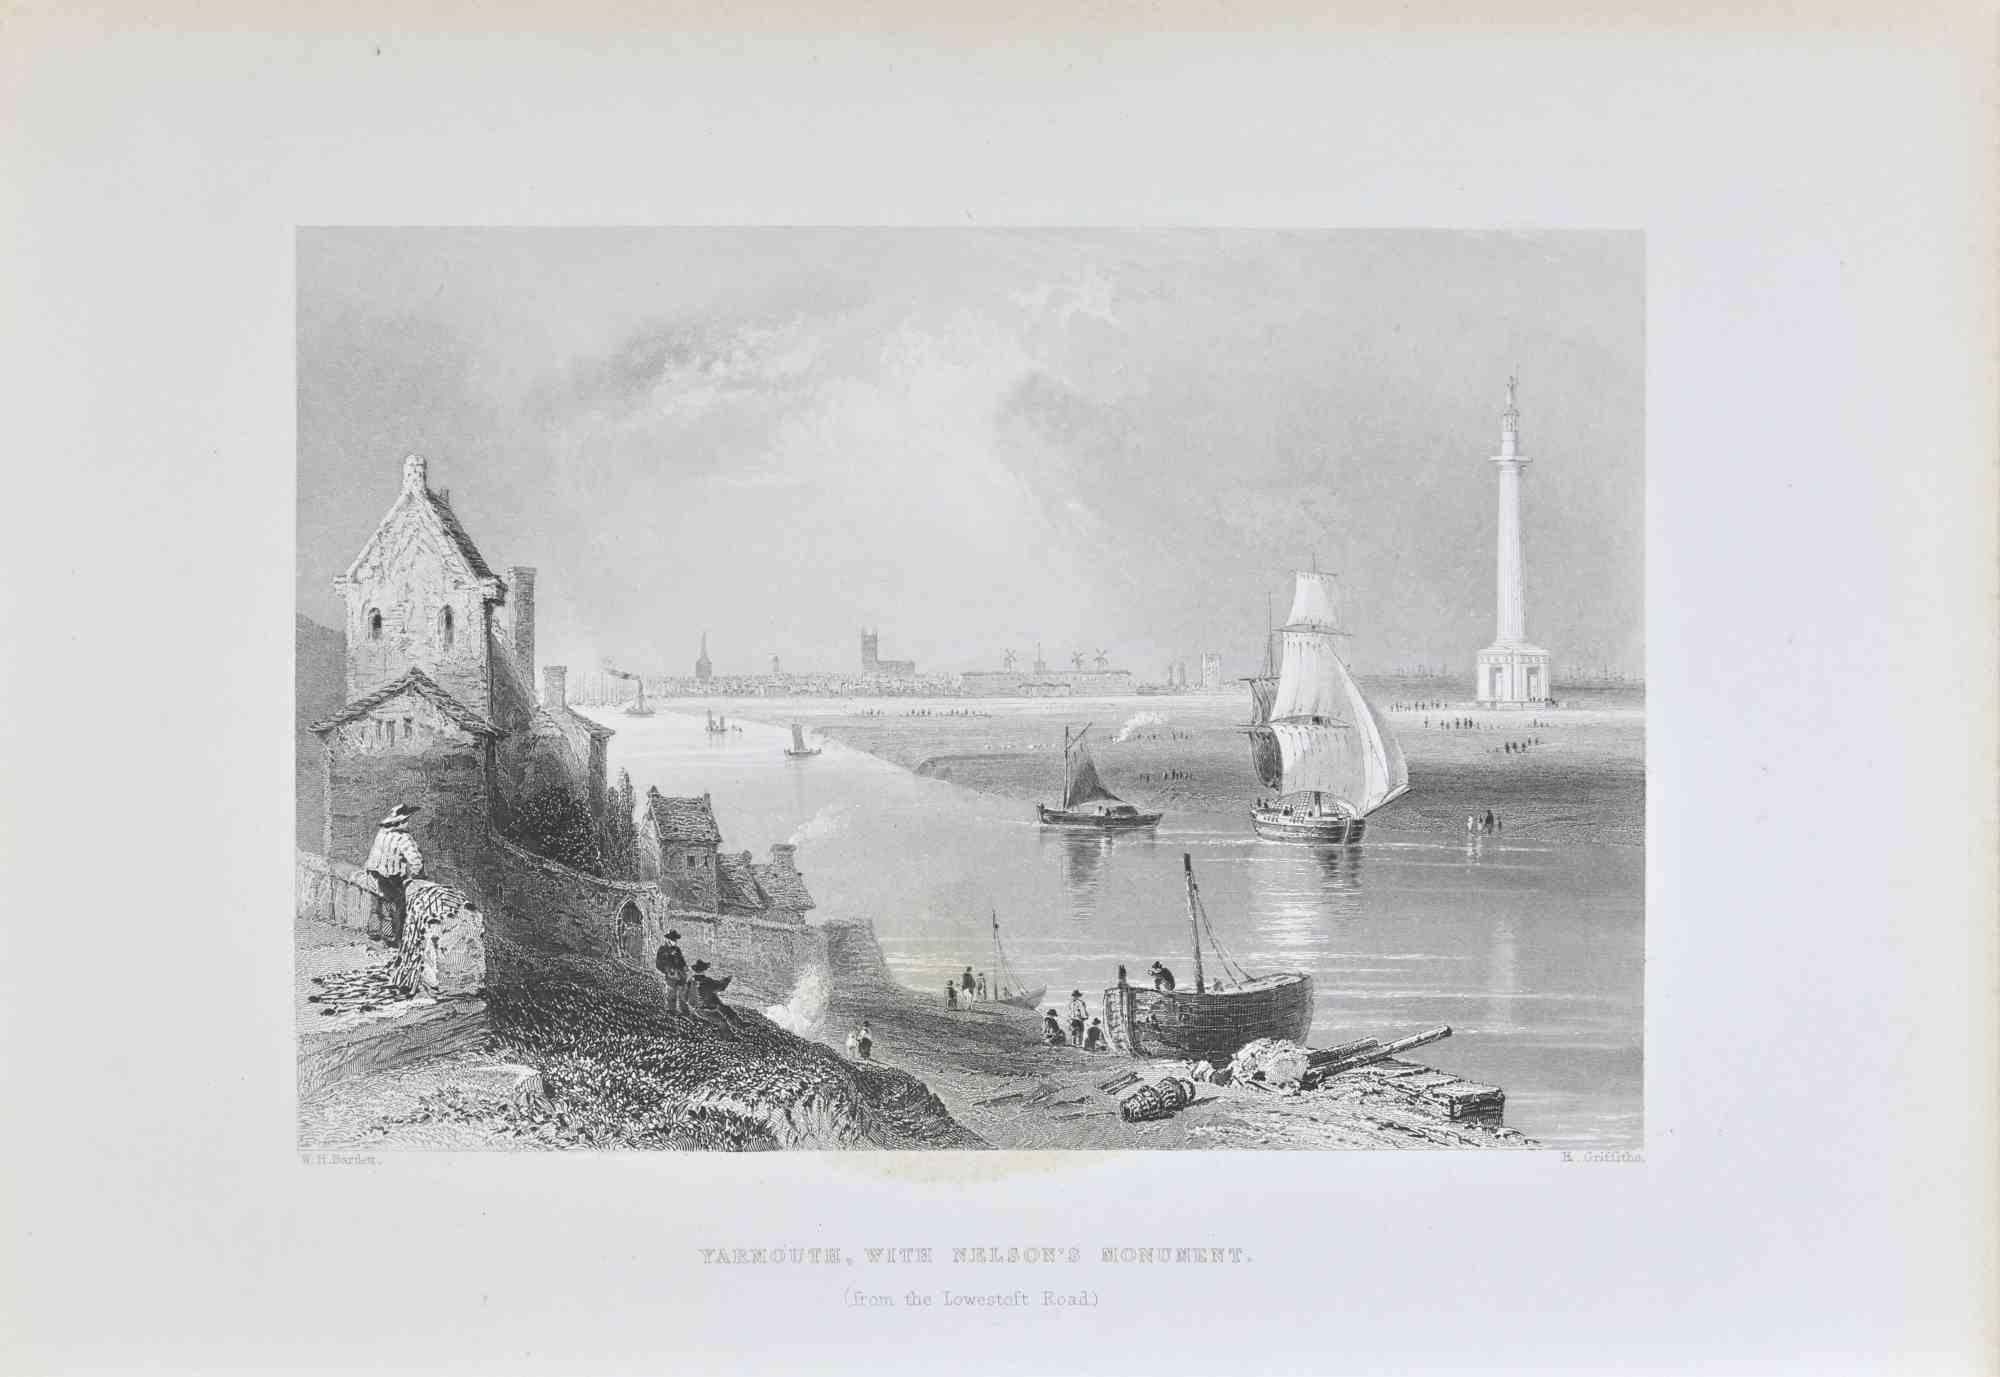 Yarmouth is an etching realized in 1845 by H. Griffiths.

Signed on the plate. 

Titled on the lower center.

Good conditions with slight foxing.

The artwork is beautifully realized in a well-balanced composition through short, deft strokes.